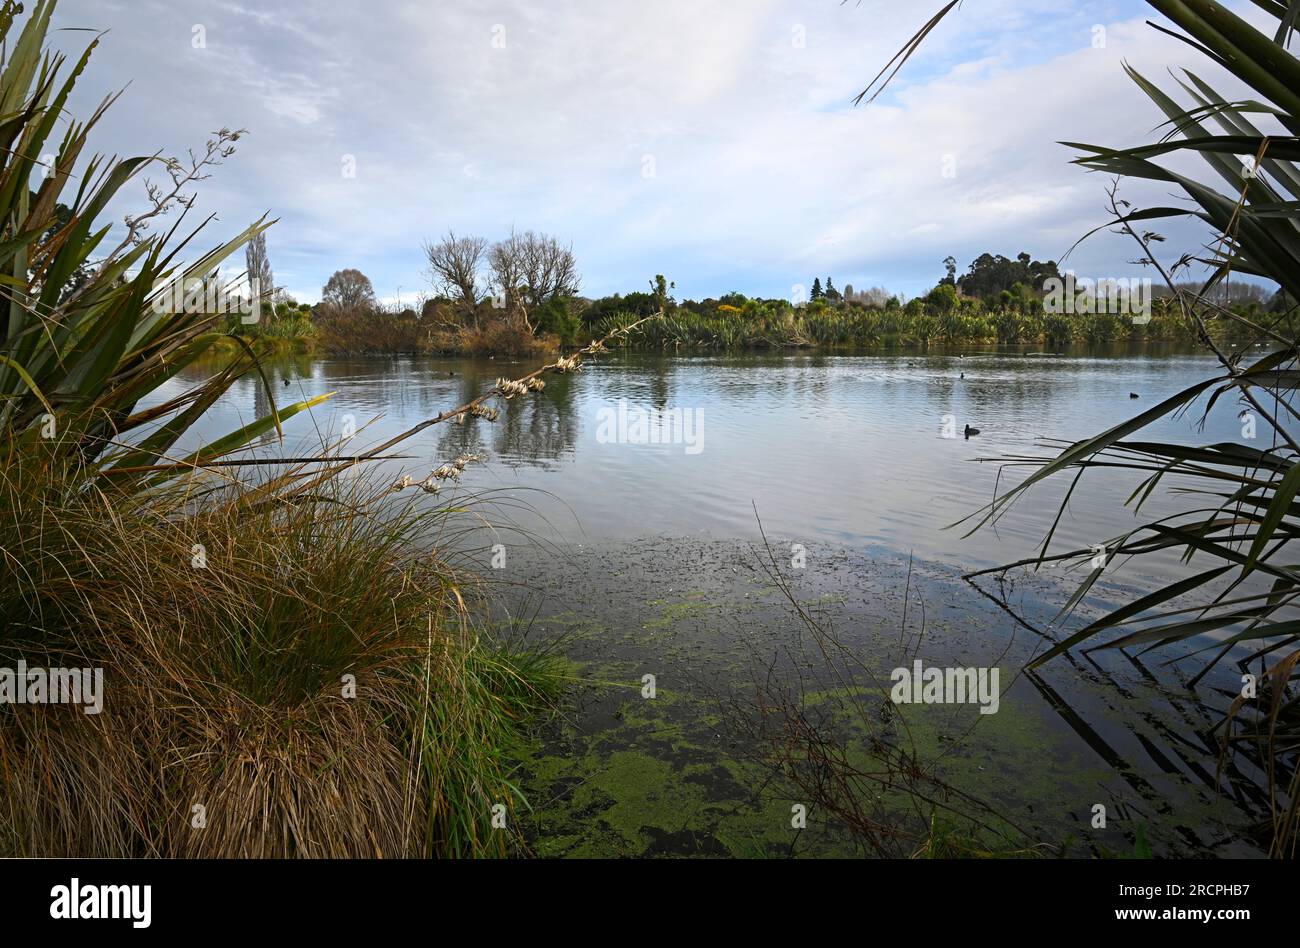 Styx Mill Conservation Area lake, with Flax Bushes and Flowers, Christchurch, New Zealand Stock Photo